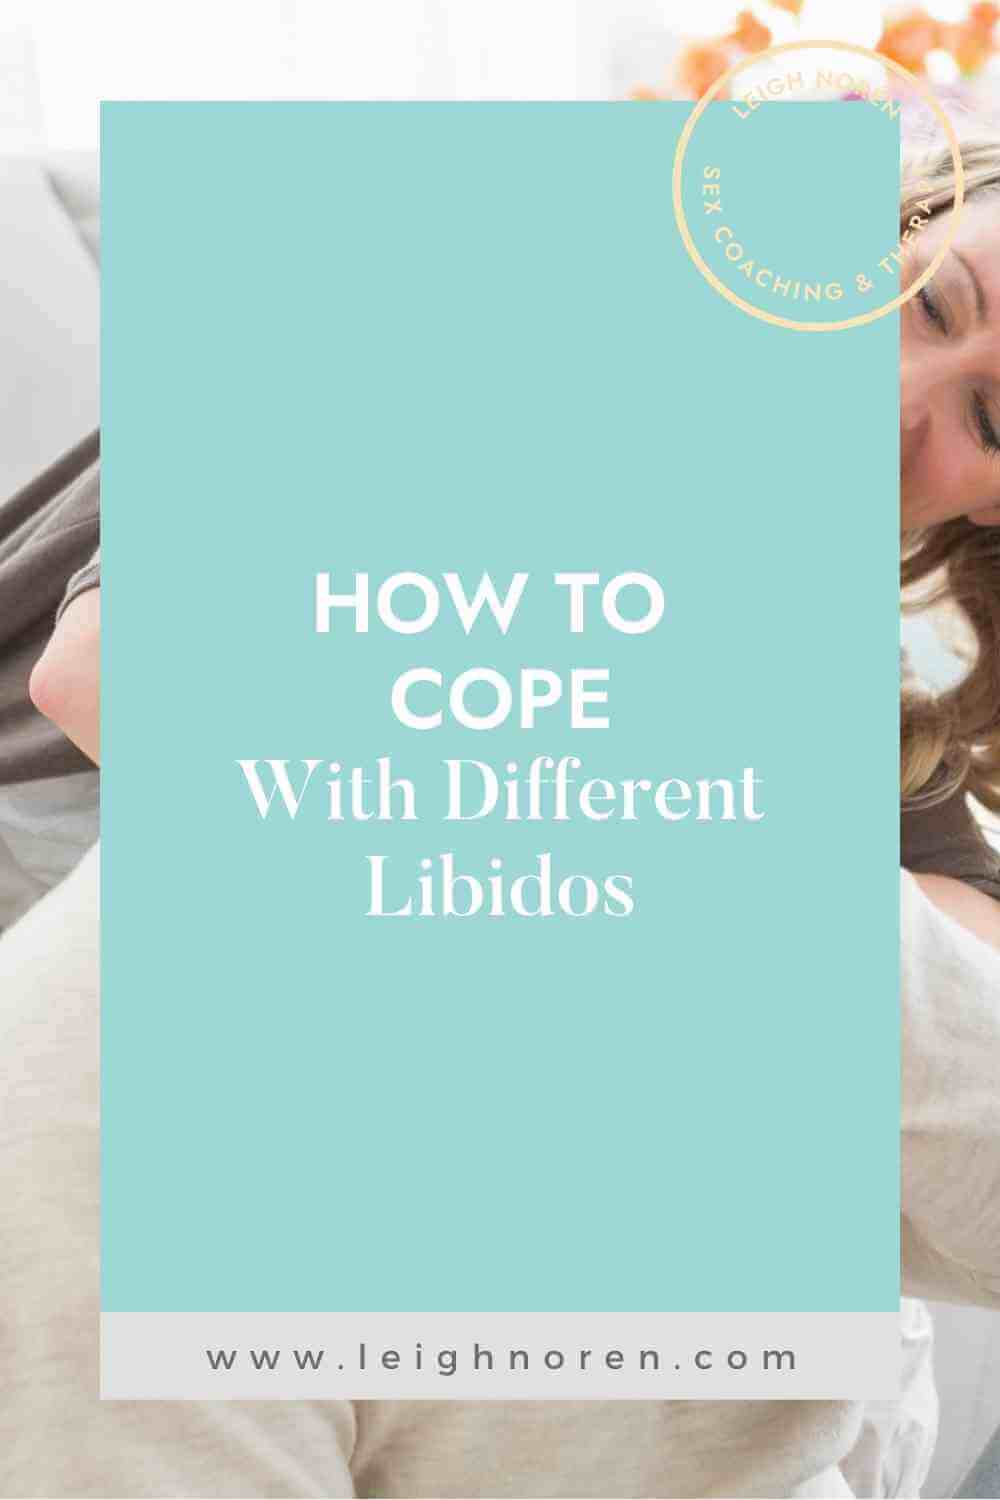 How To Cope With Different Libidos